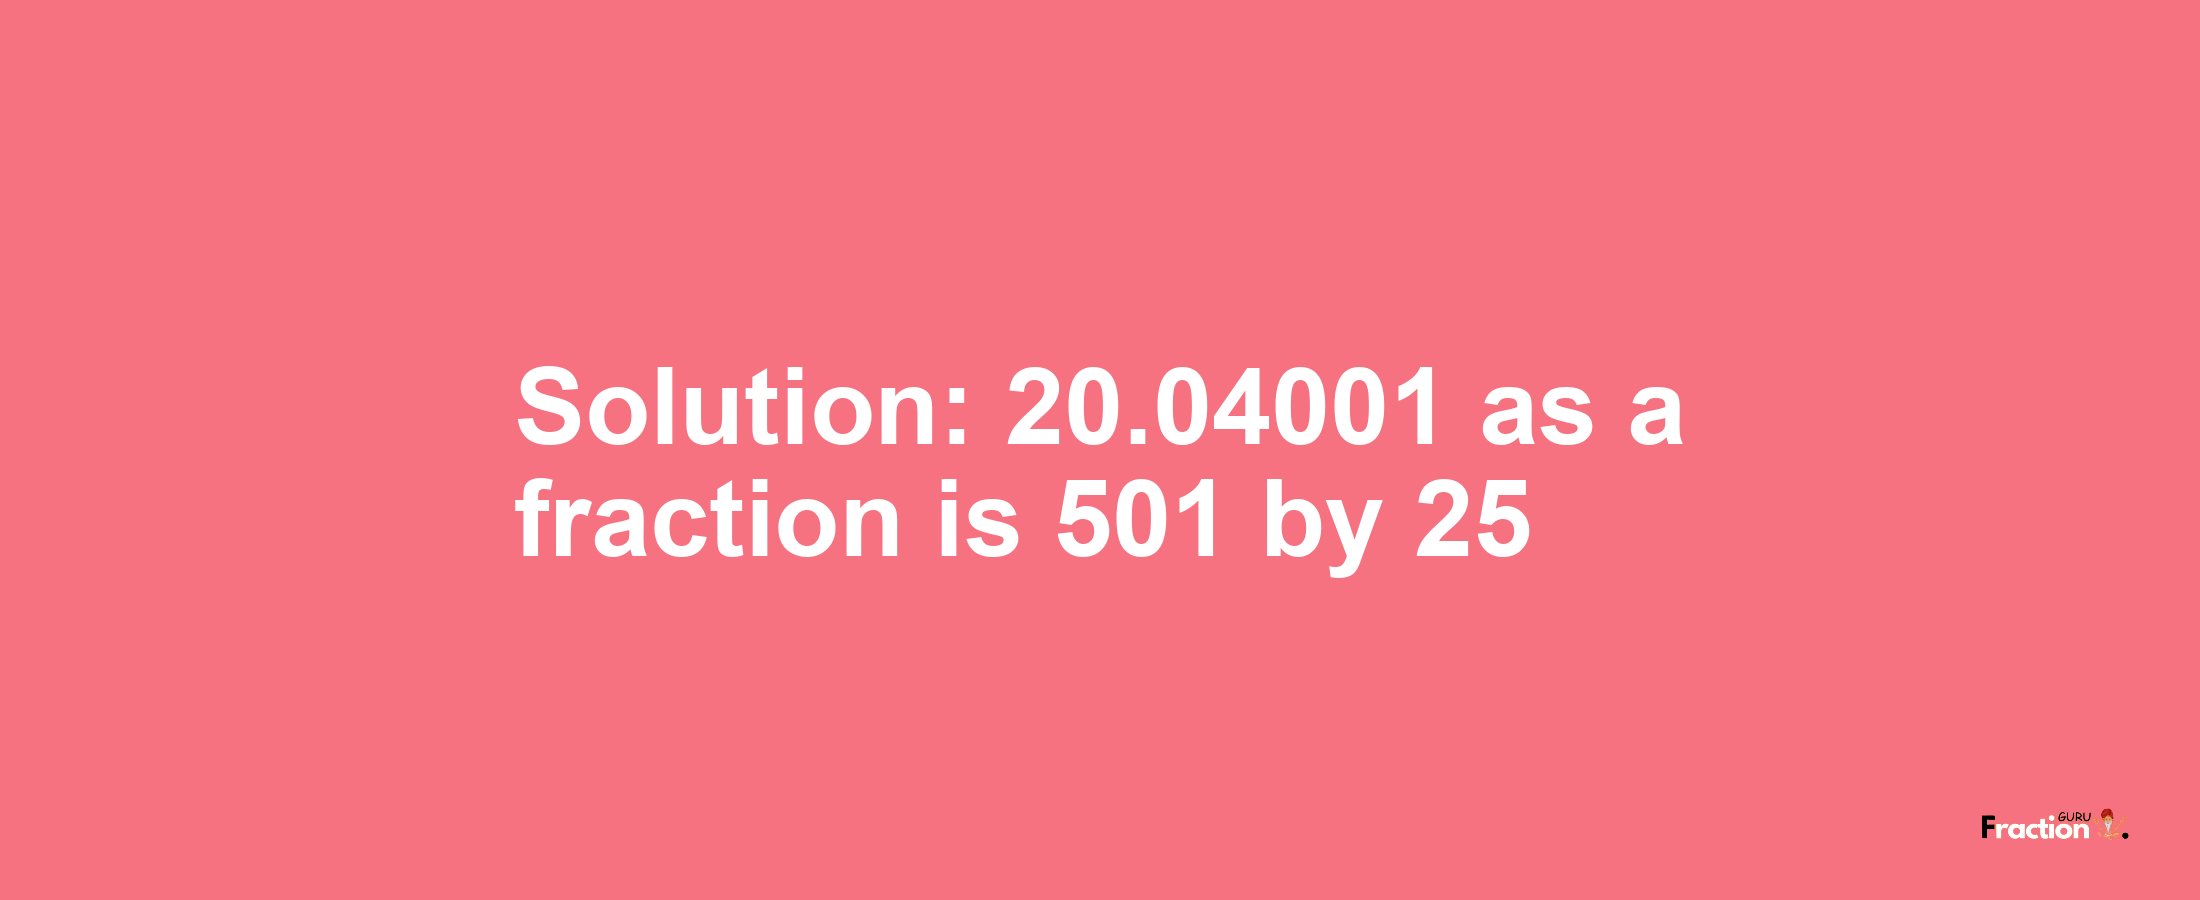 Solution:20.04001 as a fraction is 501/25